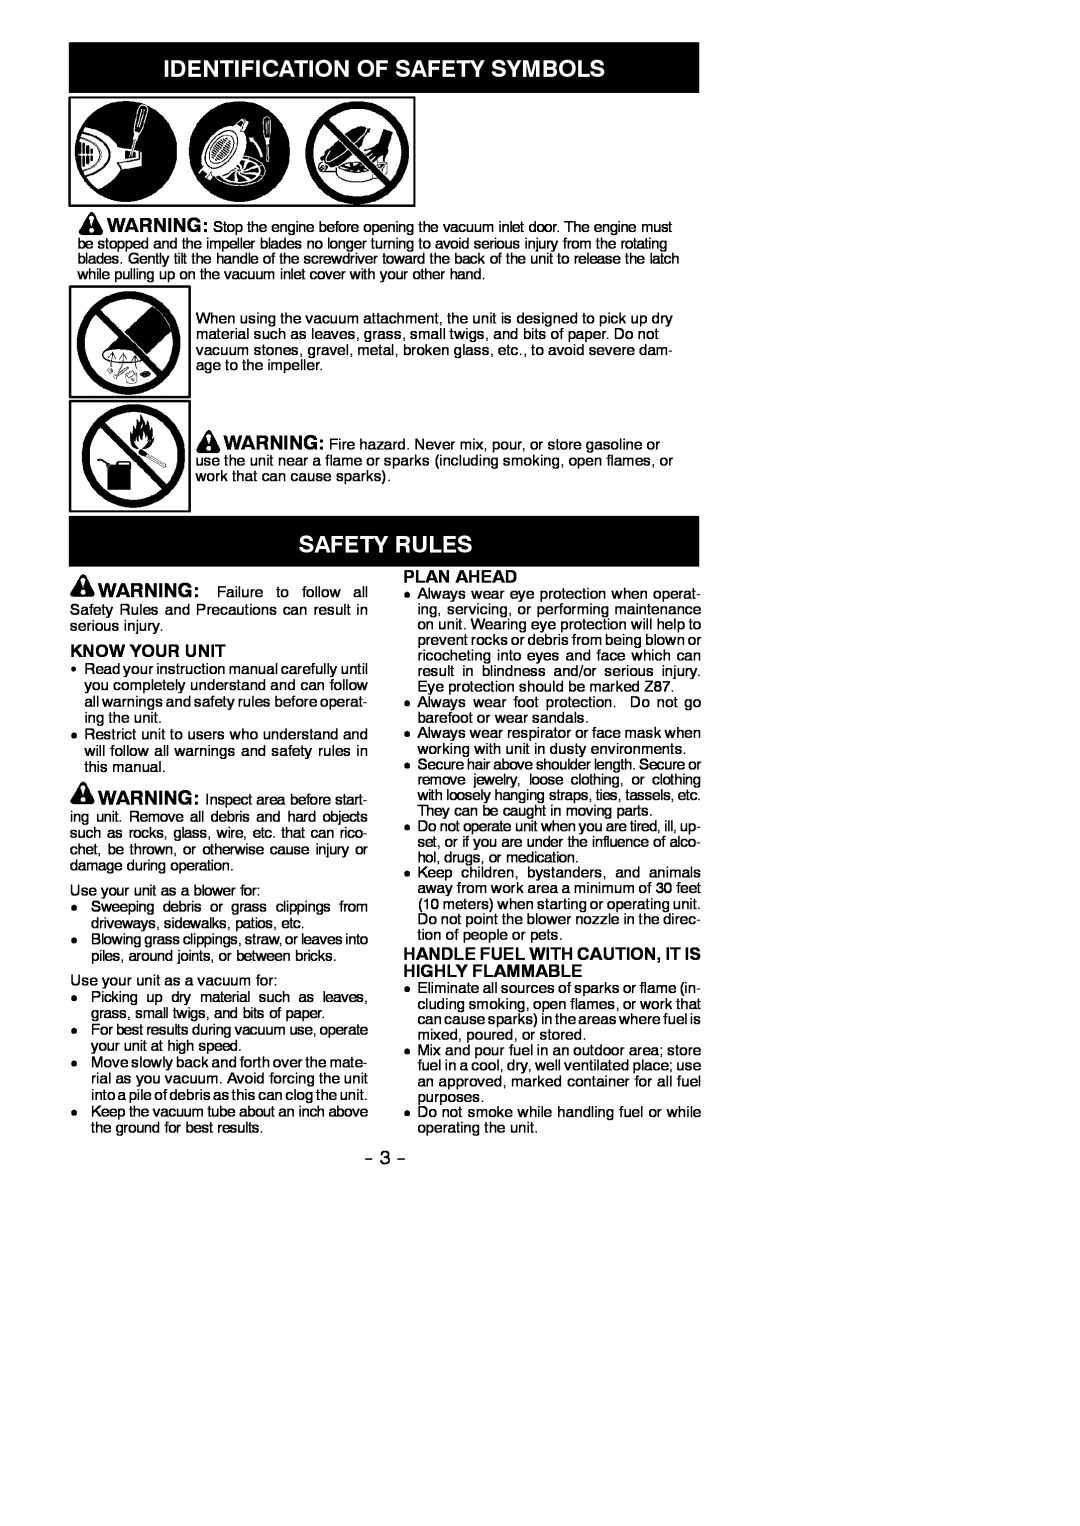 Poulan SM400 instruction manual Safety Rules, Identification Of Safety Symbols, Know Your Unit, Plan Ahead 